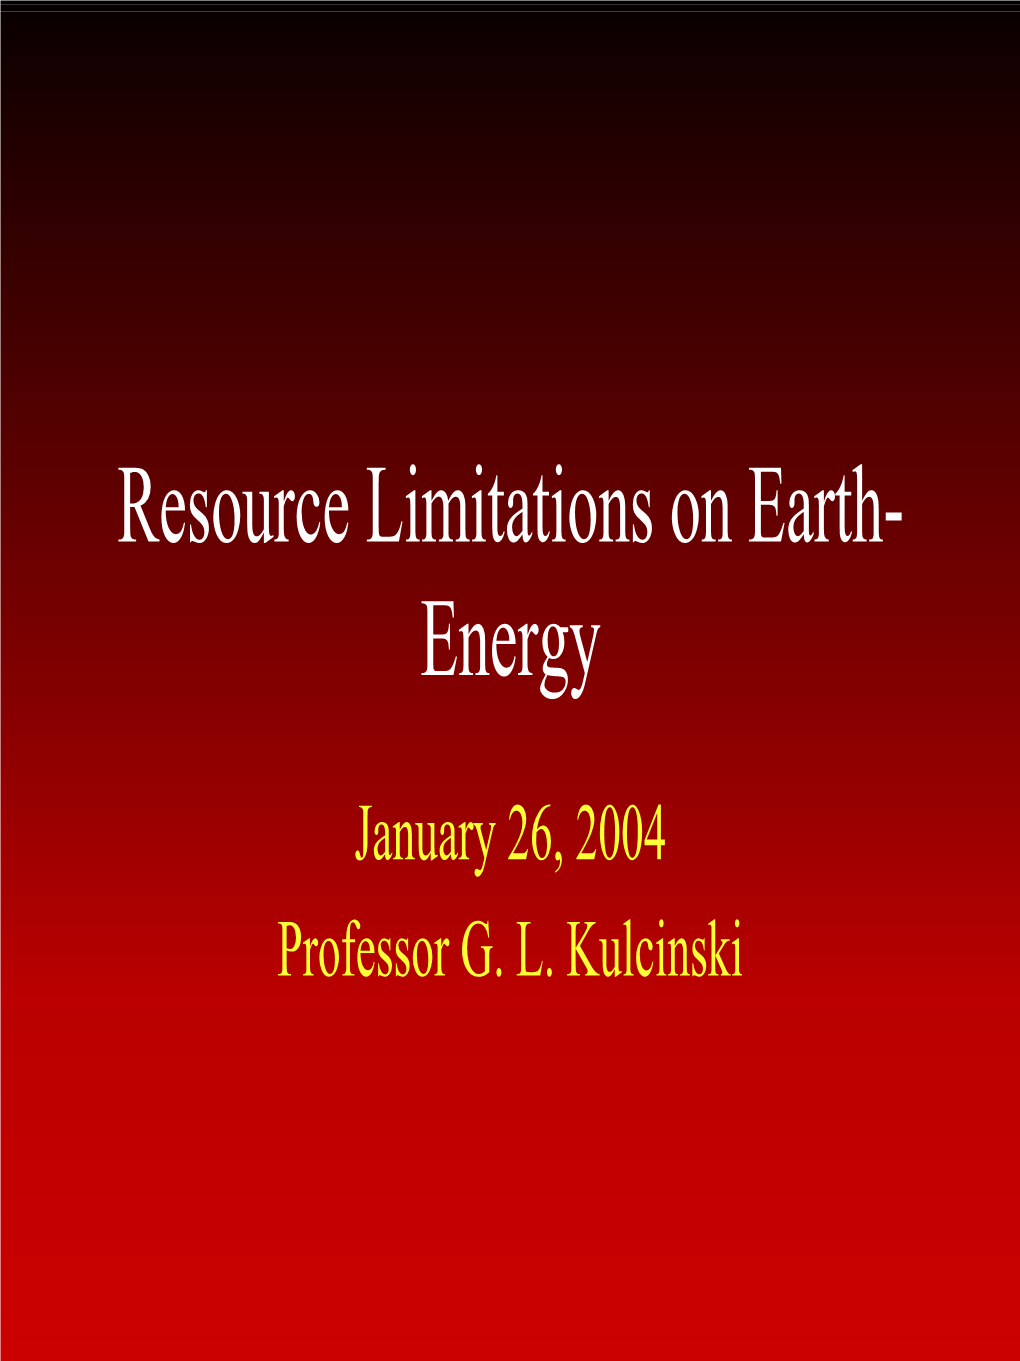 Resource Limitations on Earth-Energy